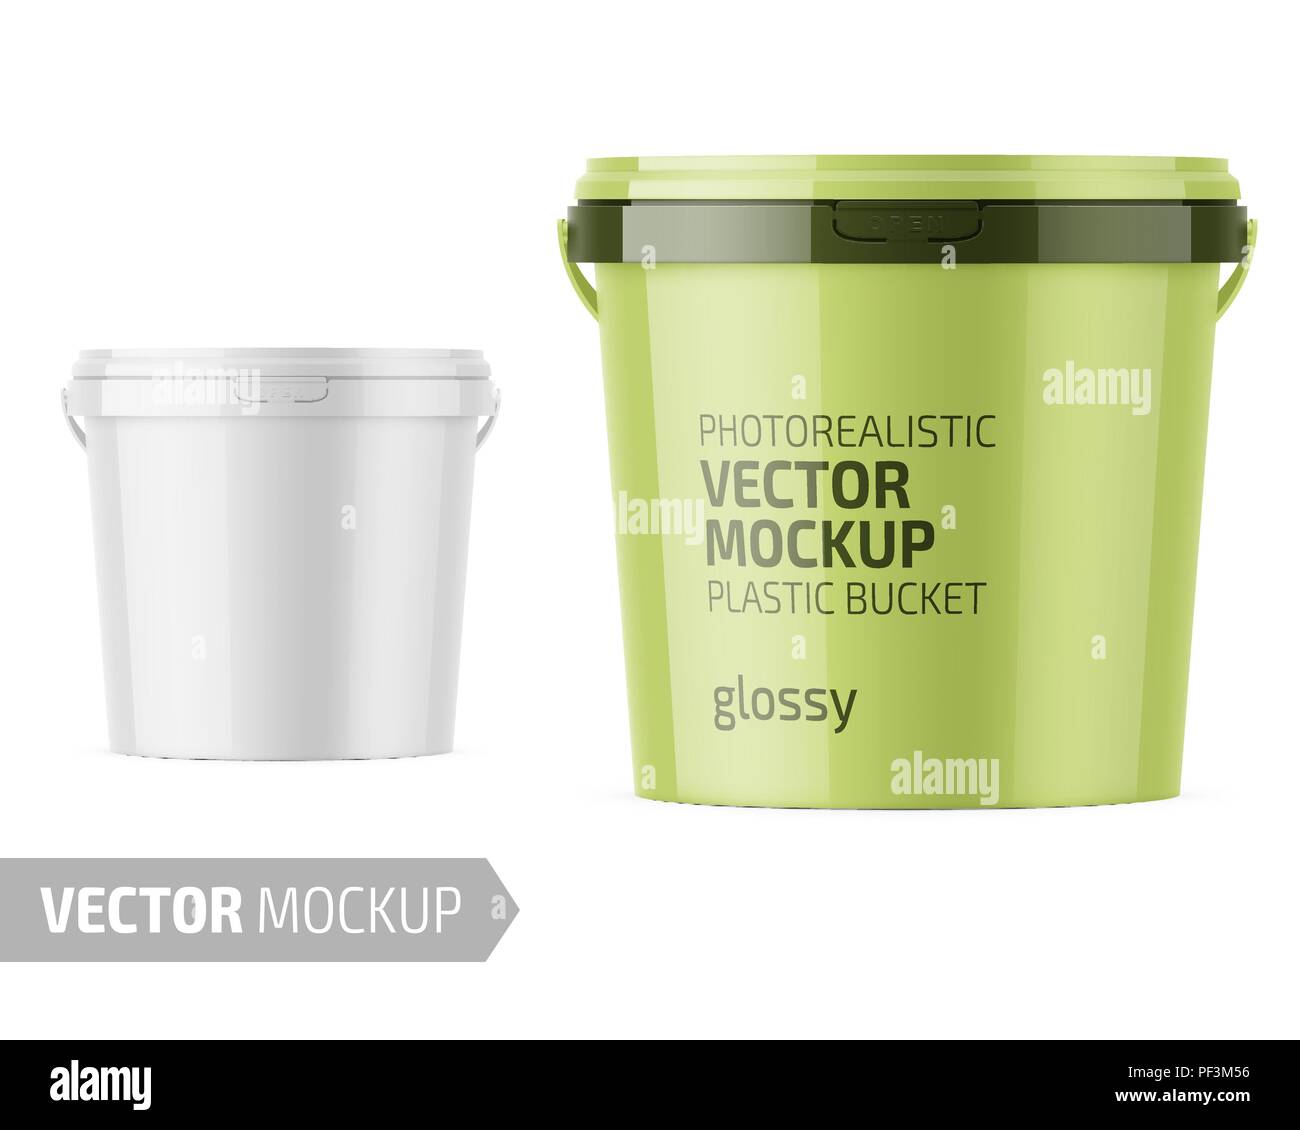 Download White Glossy Plastic Bucket For Food Products Paint Household Stuff 900 Ml Realistic Packaging Mockup Template With Sample Design Stock Vector Image Art Alamy